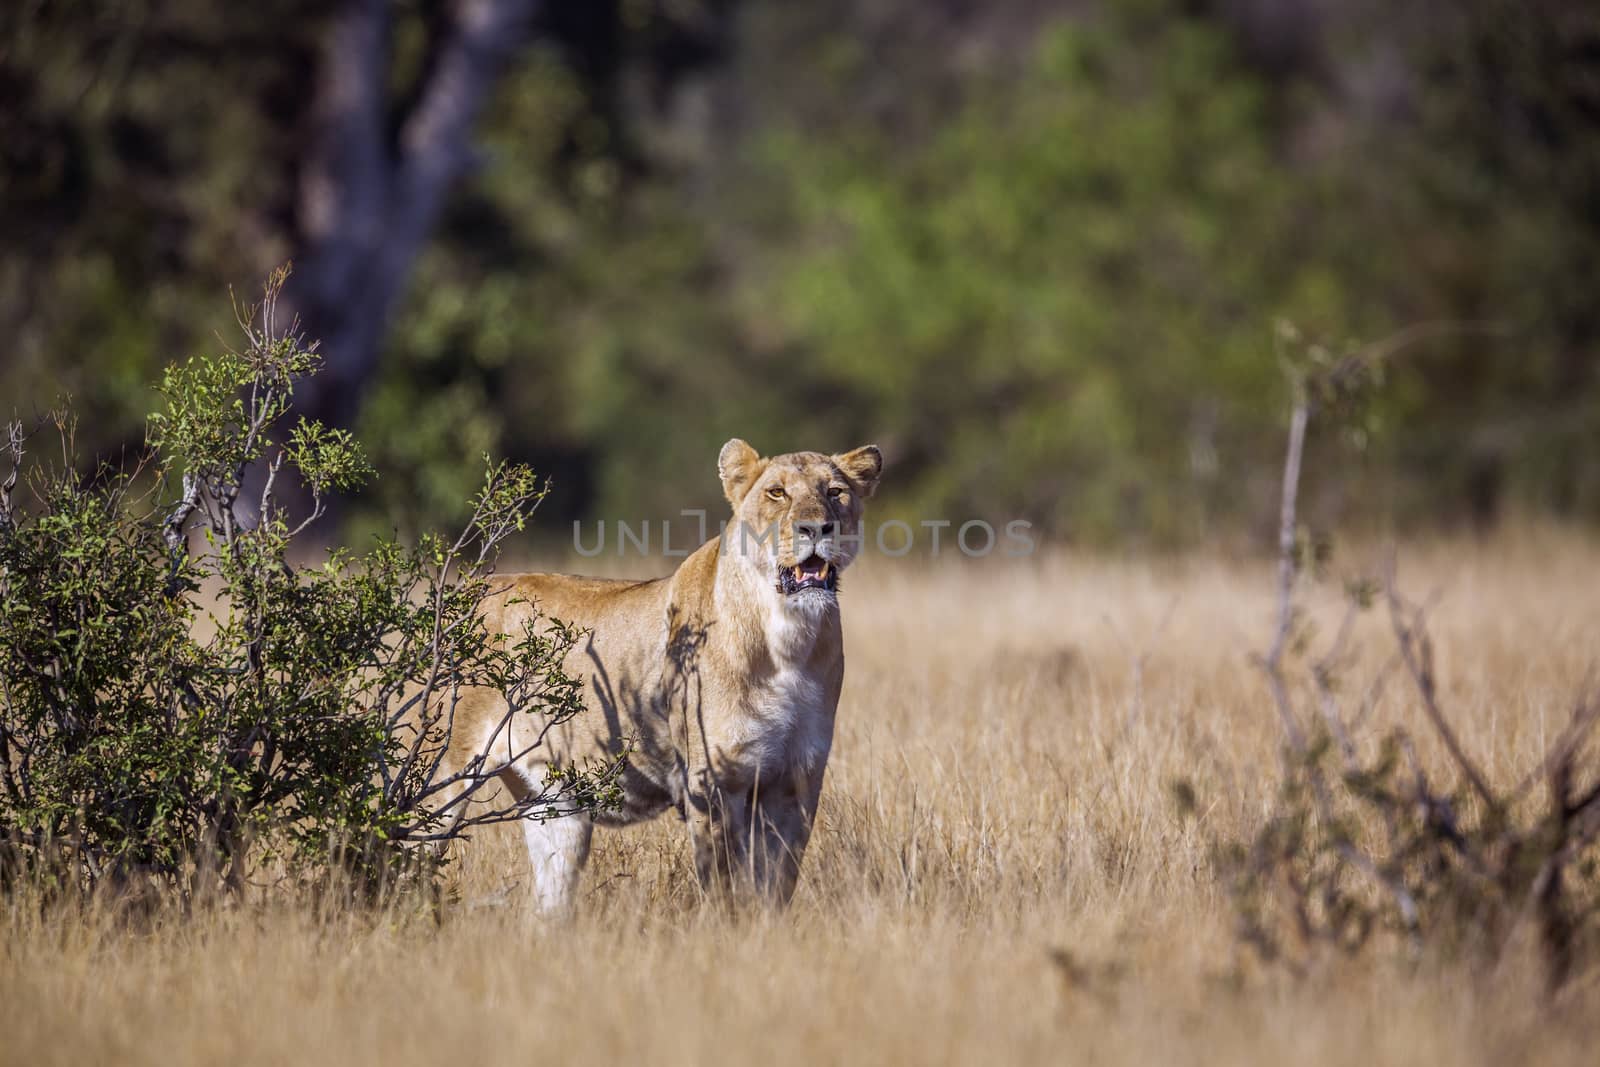 African lioness on hunting mode in savannah in Kruger National park, South Africa ; Specie Panthera leo family of Felidae